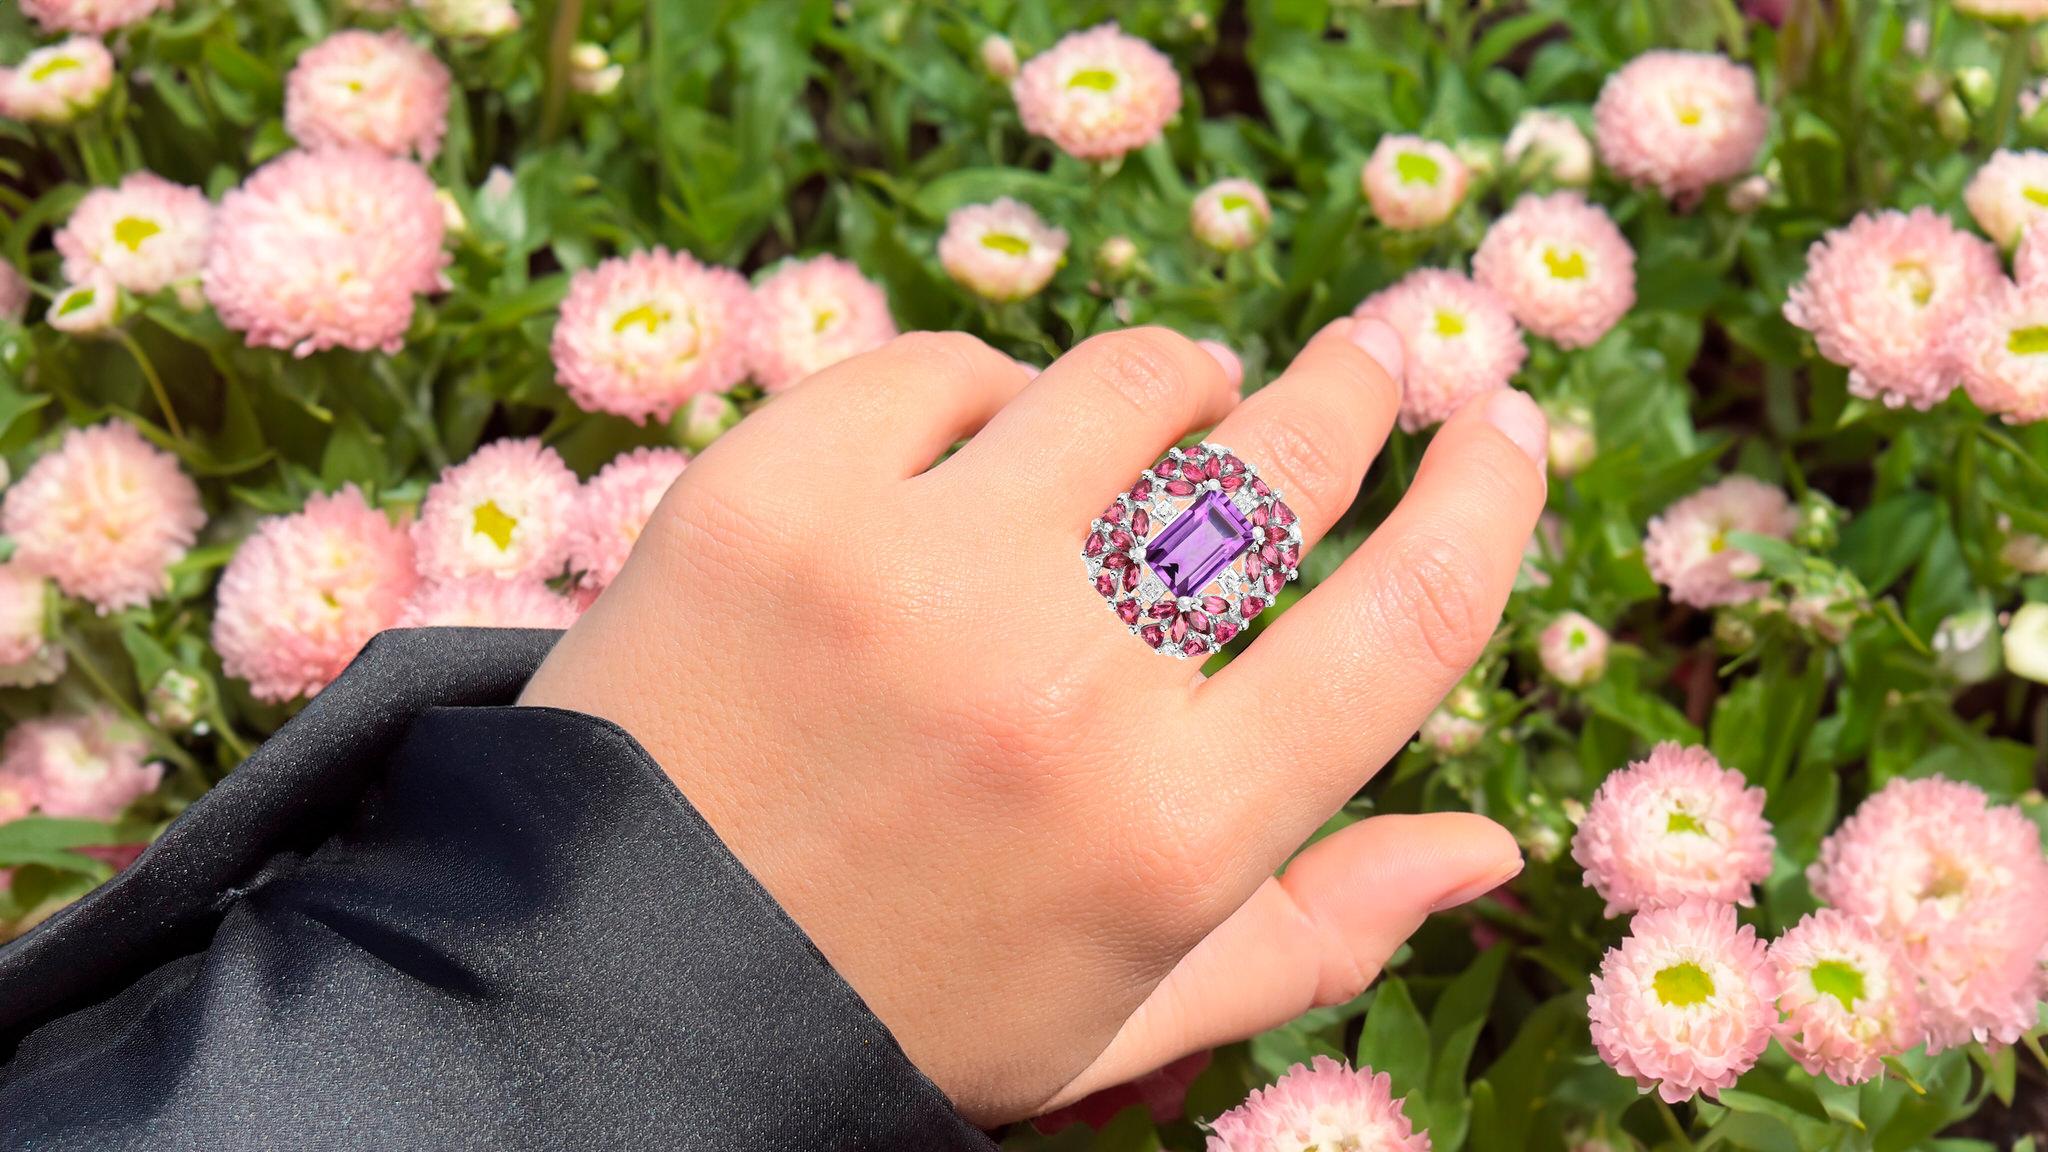 Emerald Cut Amethyst Cocktail Ring Rhodolite Garnets and White Topazes 7.60 Carats For Sale